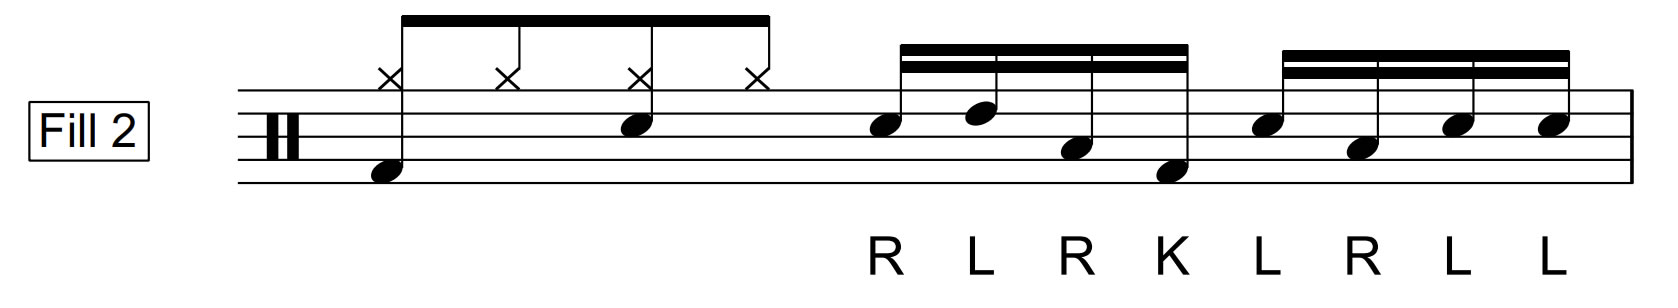 Fill 2 paradiddle